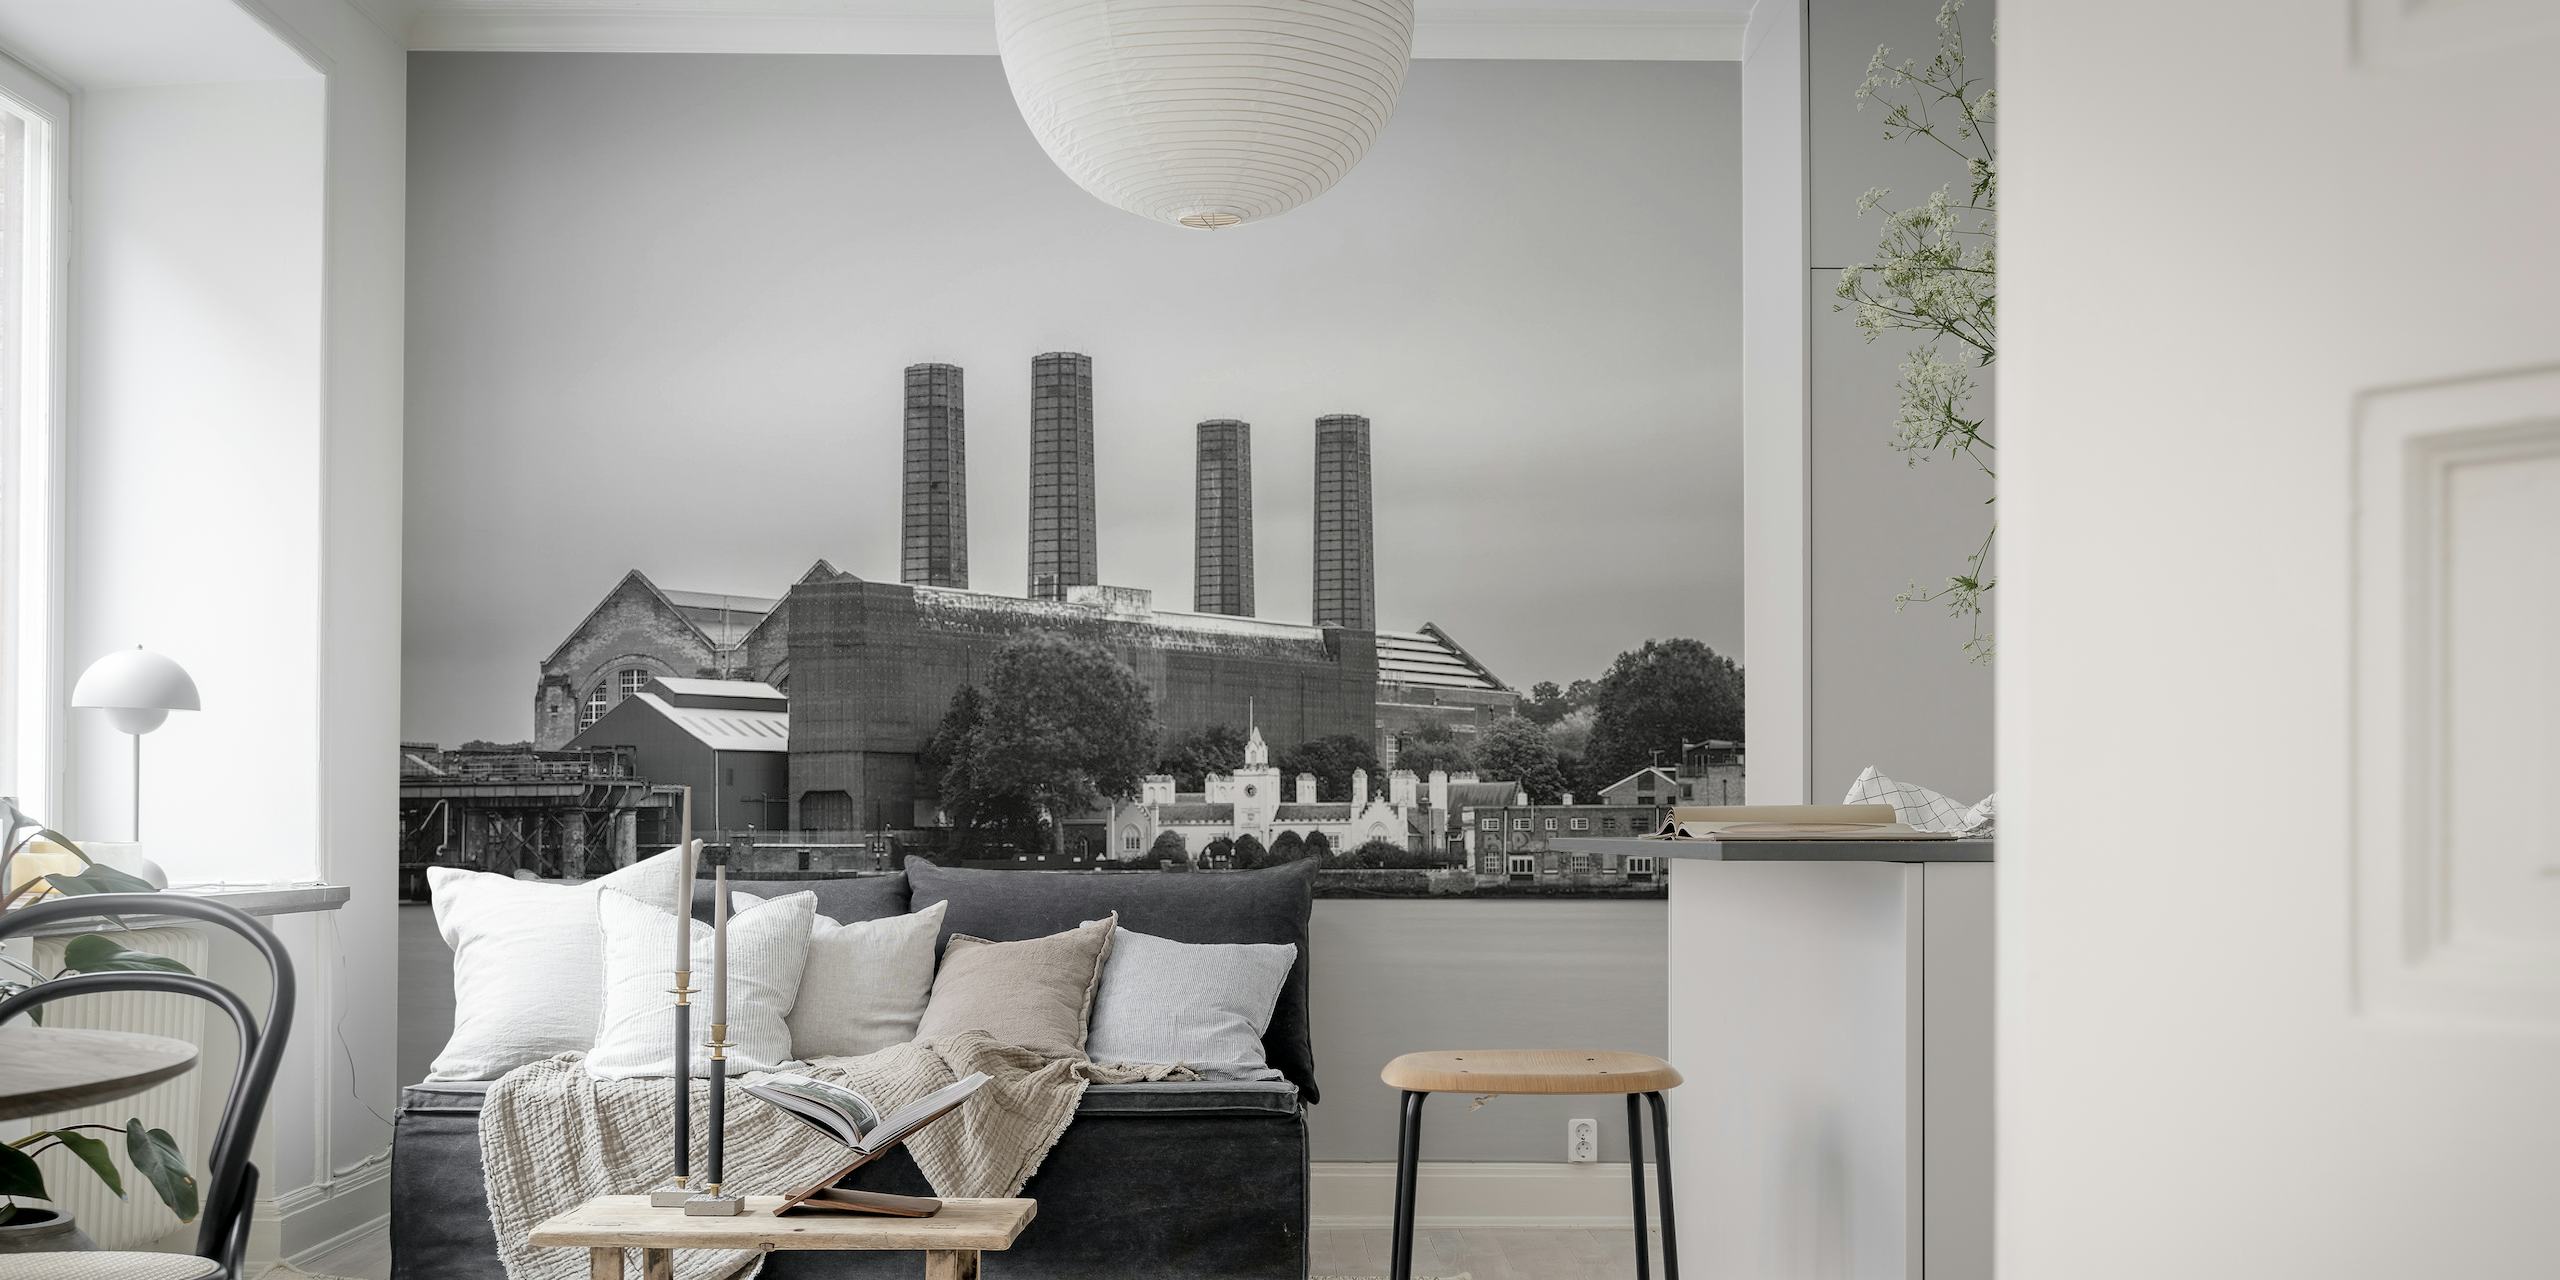 Black and white wall mural of Greenwich Power Station with a classic industrial look